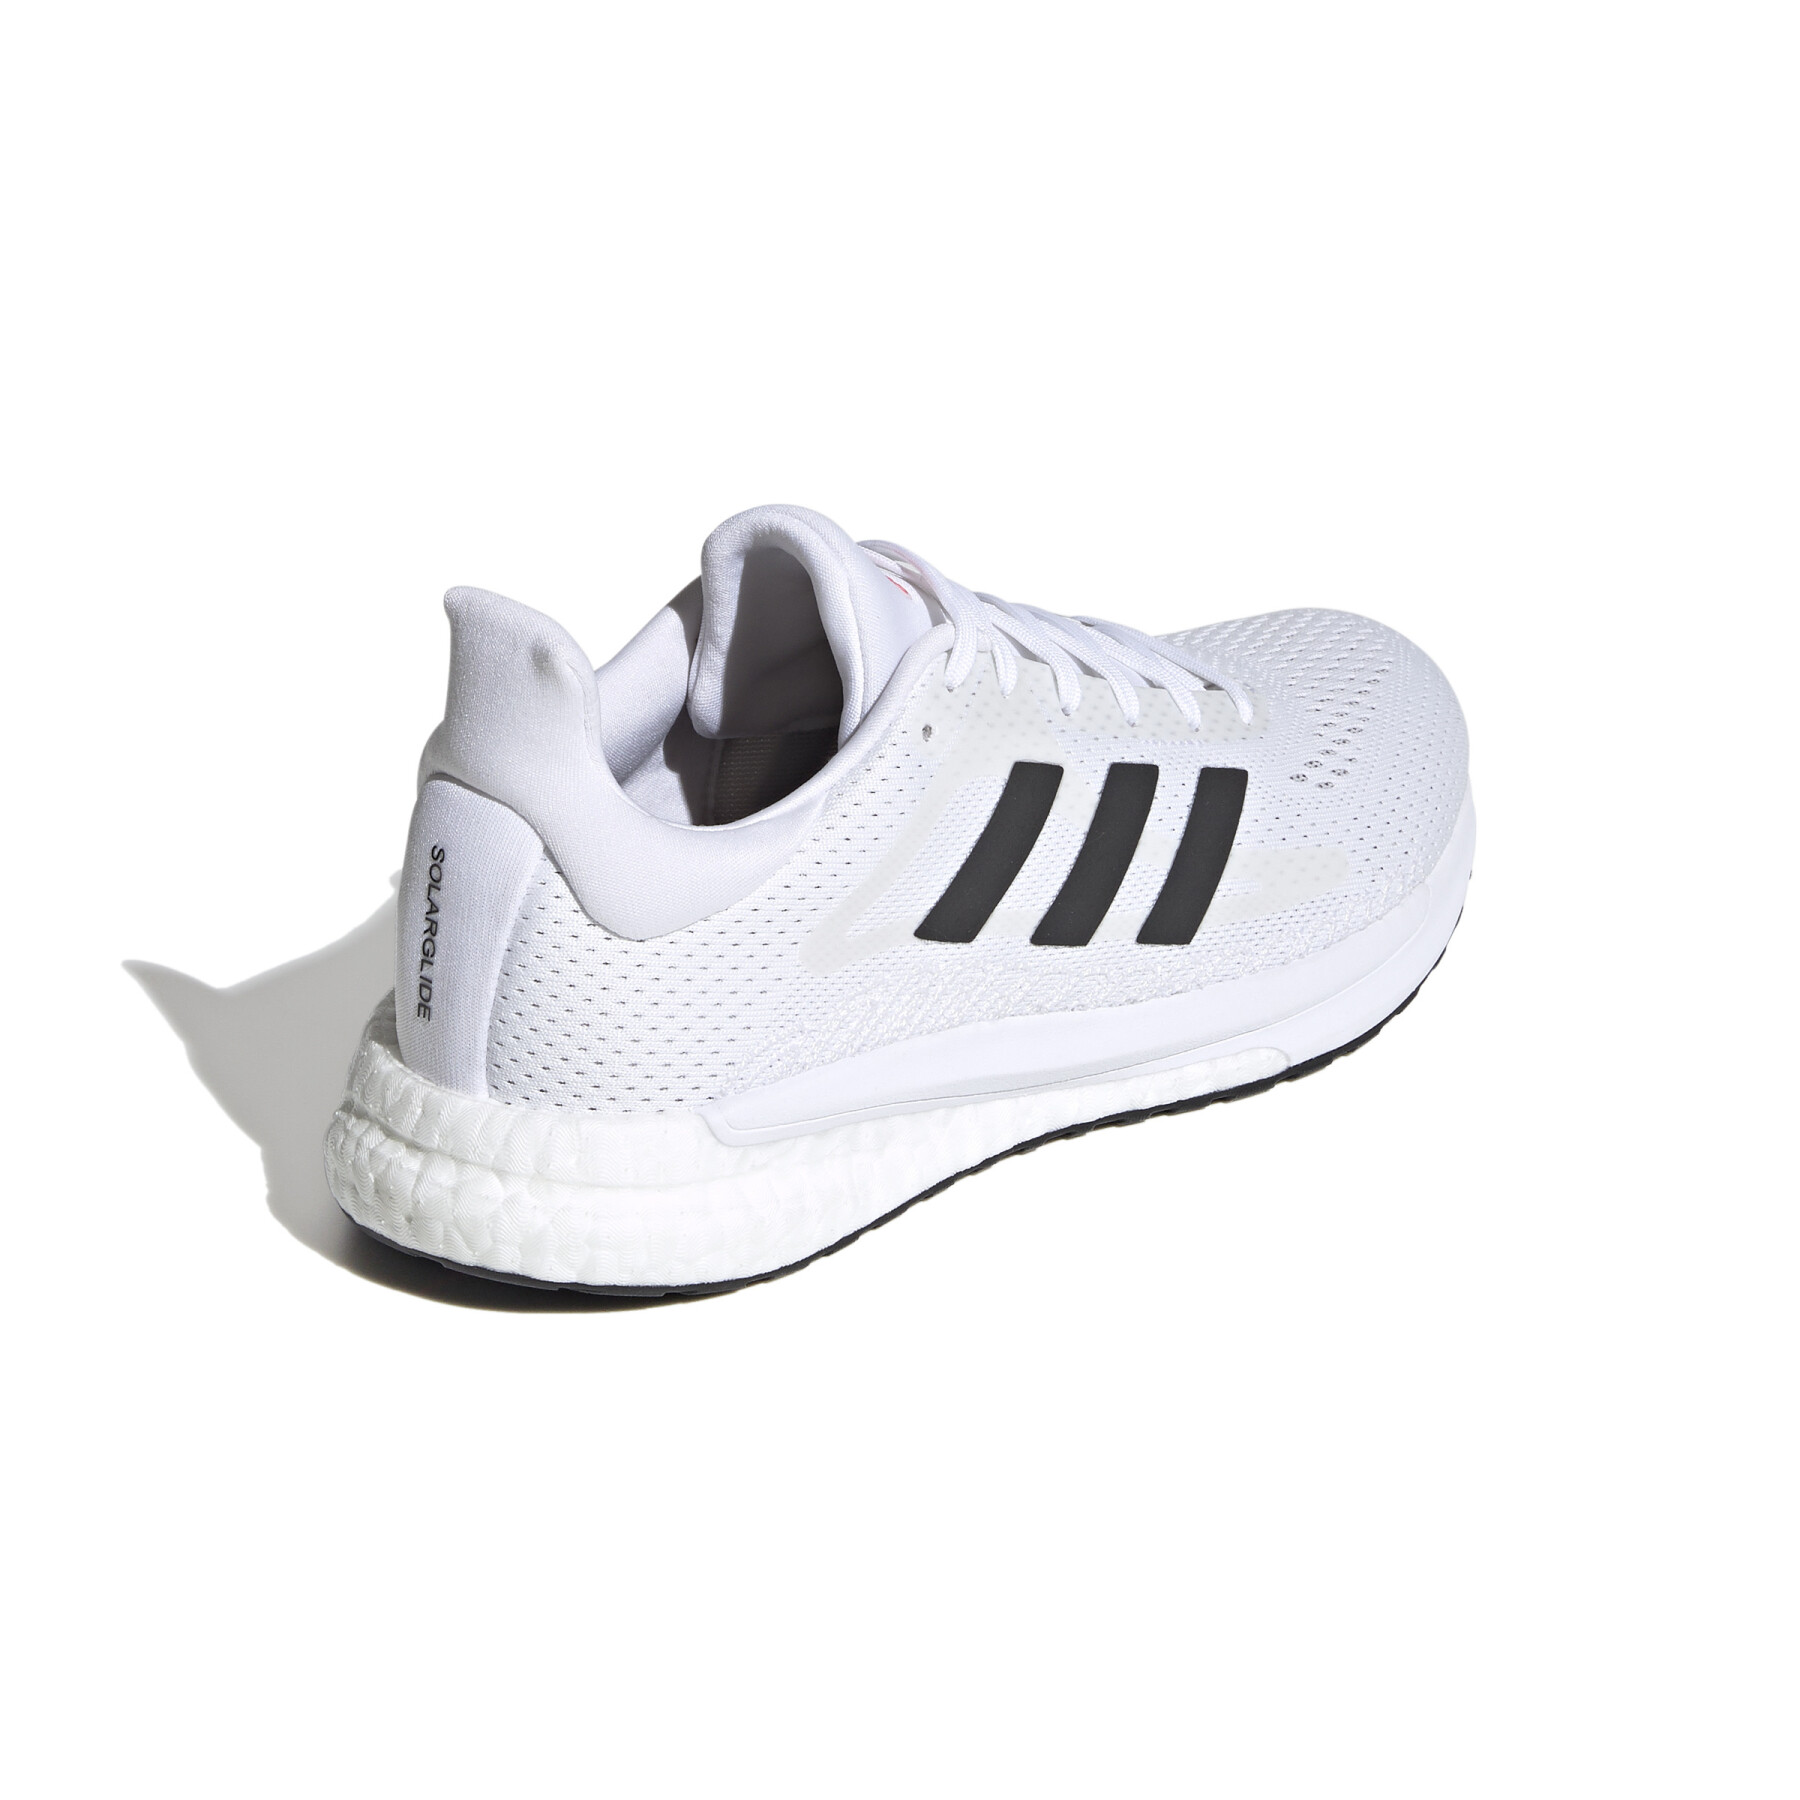 Women's running shoes adidas SolarGlide 3